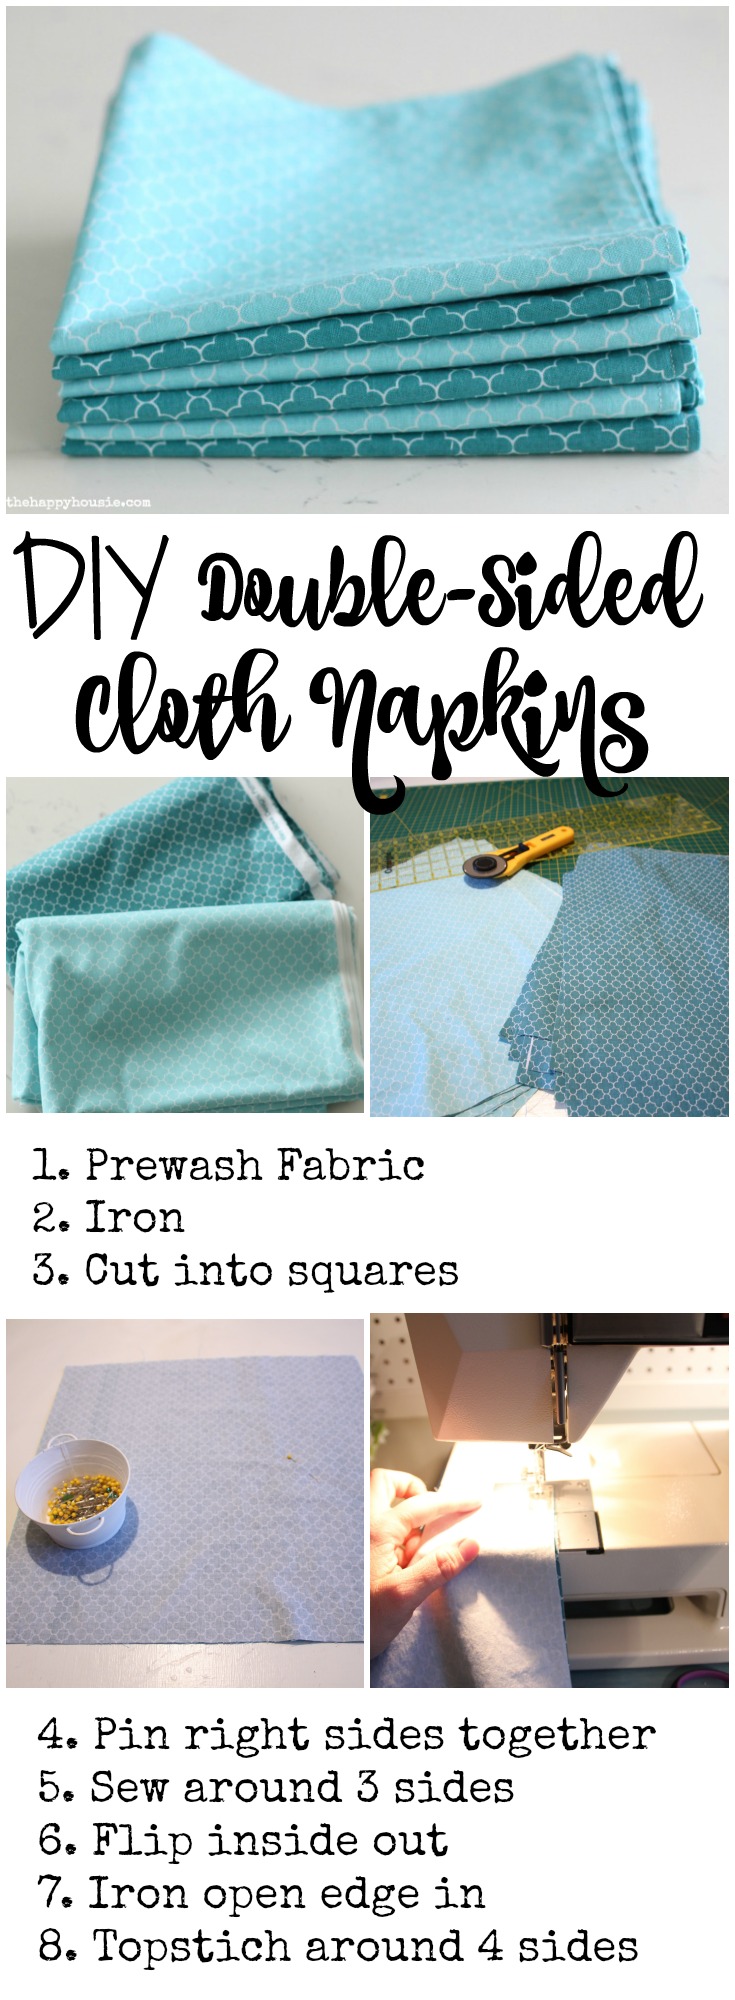 https://www.thehappyhousie.com/wp-content/uploads/2015/12/How-to-make-your-own-beautiful-DIY-Double-Sided-Cloth-Napkins-tutorial-at-thehappyhousie.com_.jpg